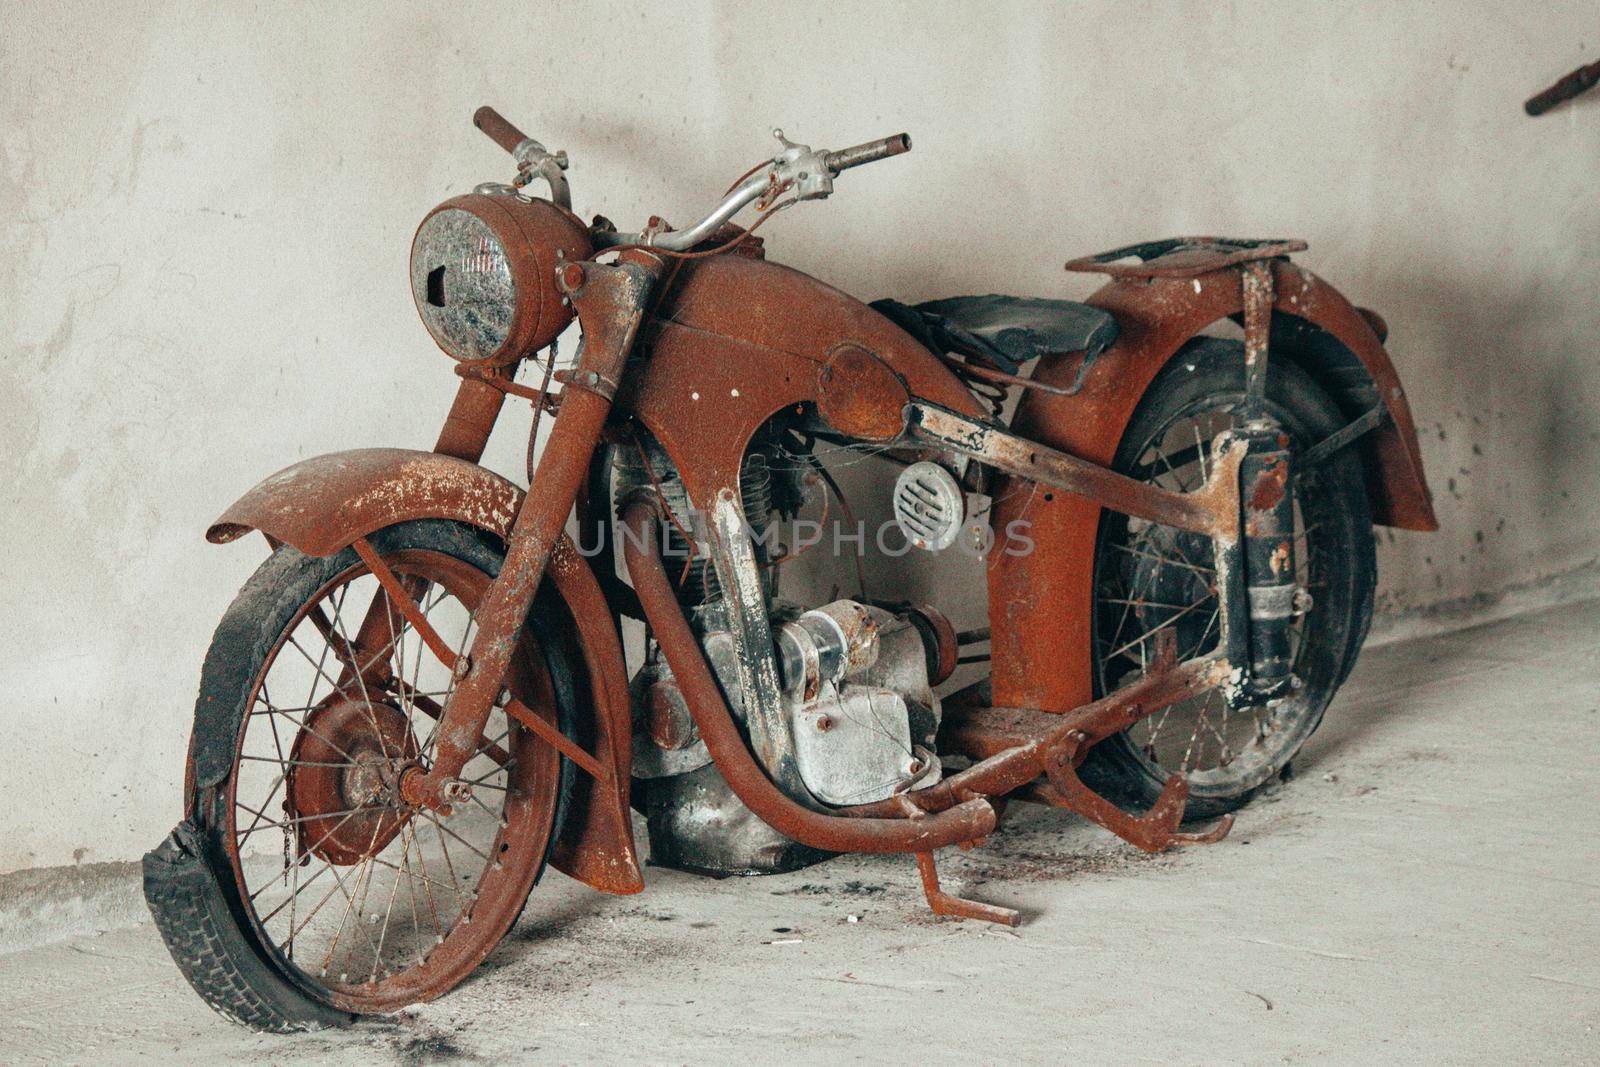 Vintage fully rusty motorcycle with torn tires by grekoni